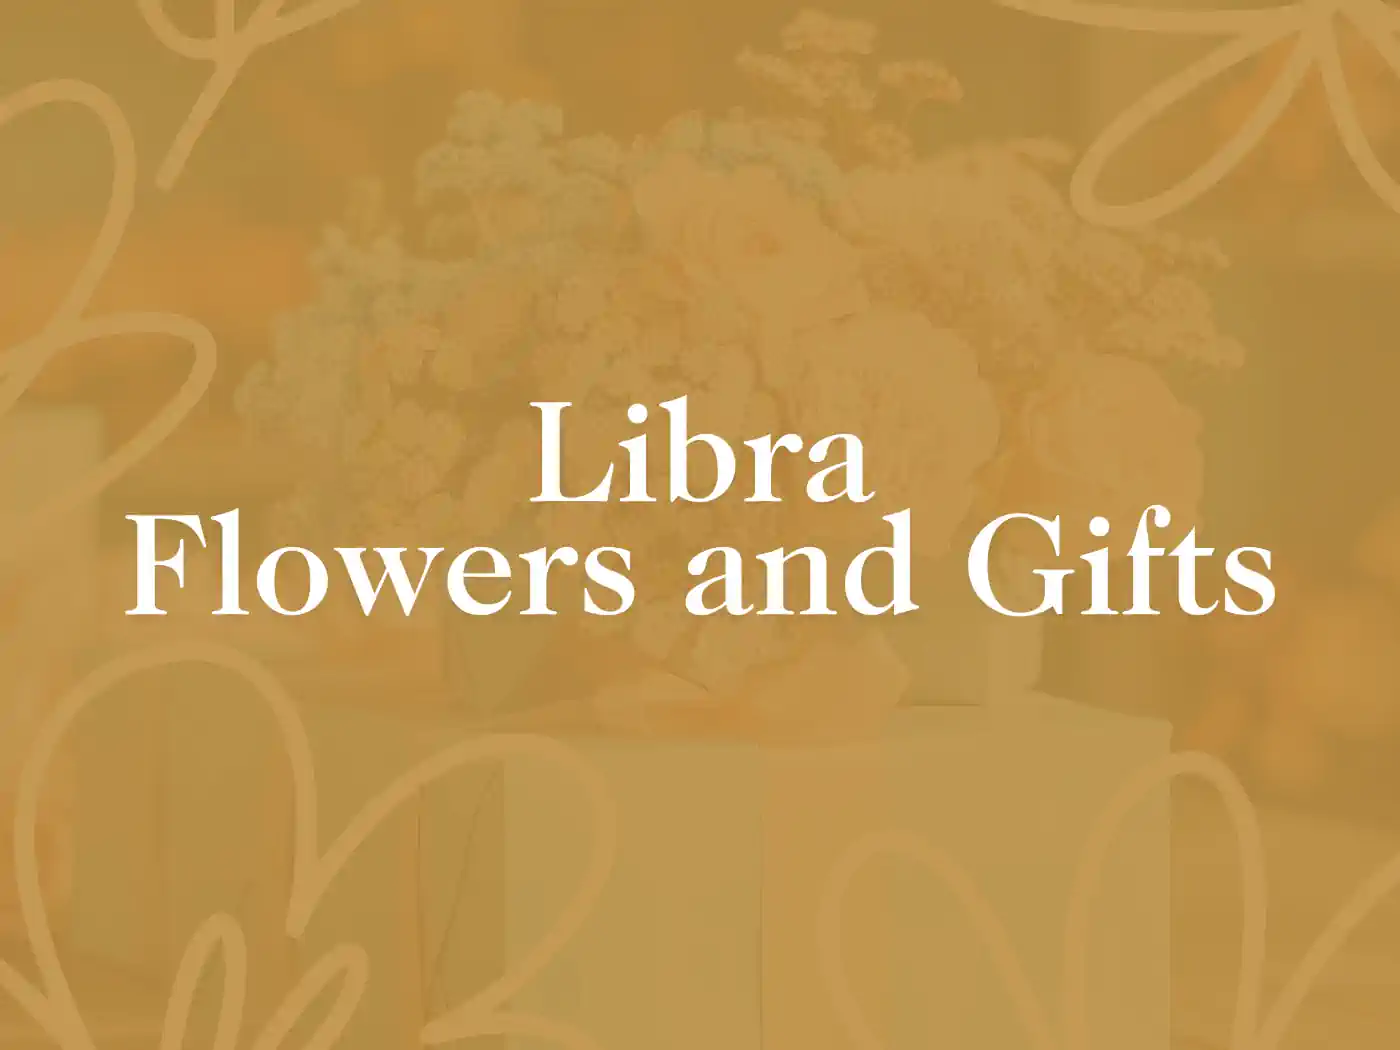 Libra Flowers and Gifts signboard showcasing elegant branding. Fabulous Flowers and Gifts